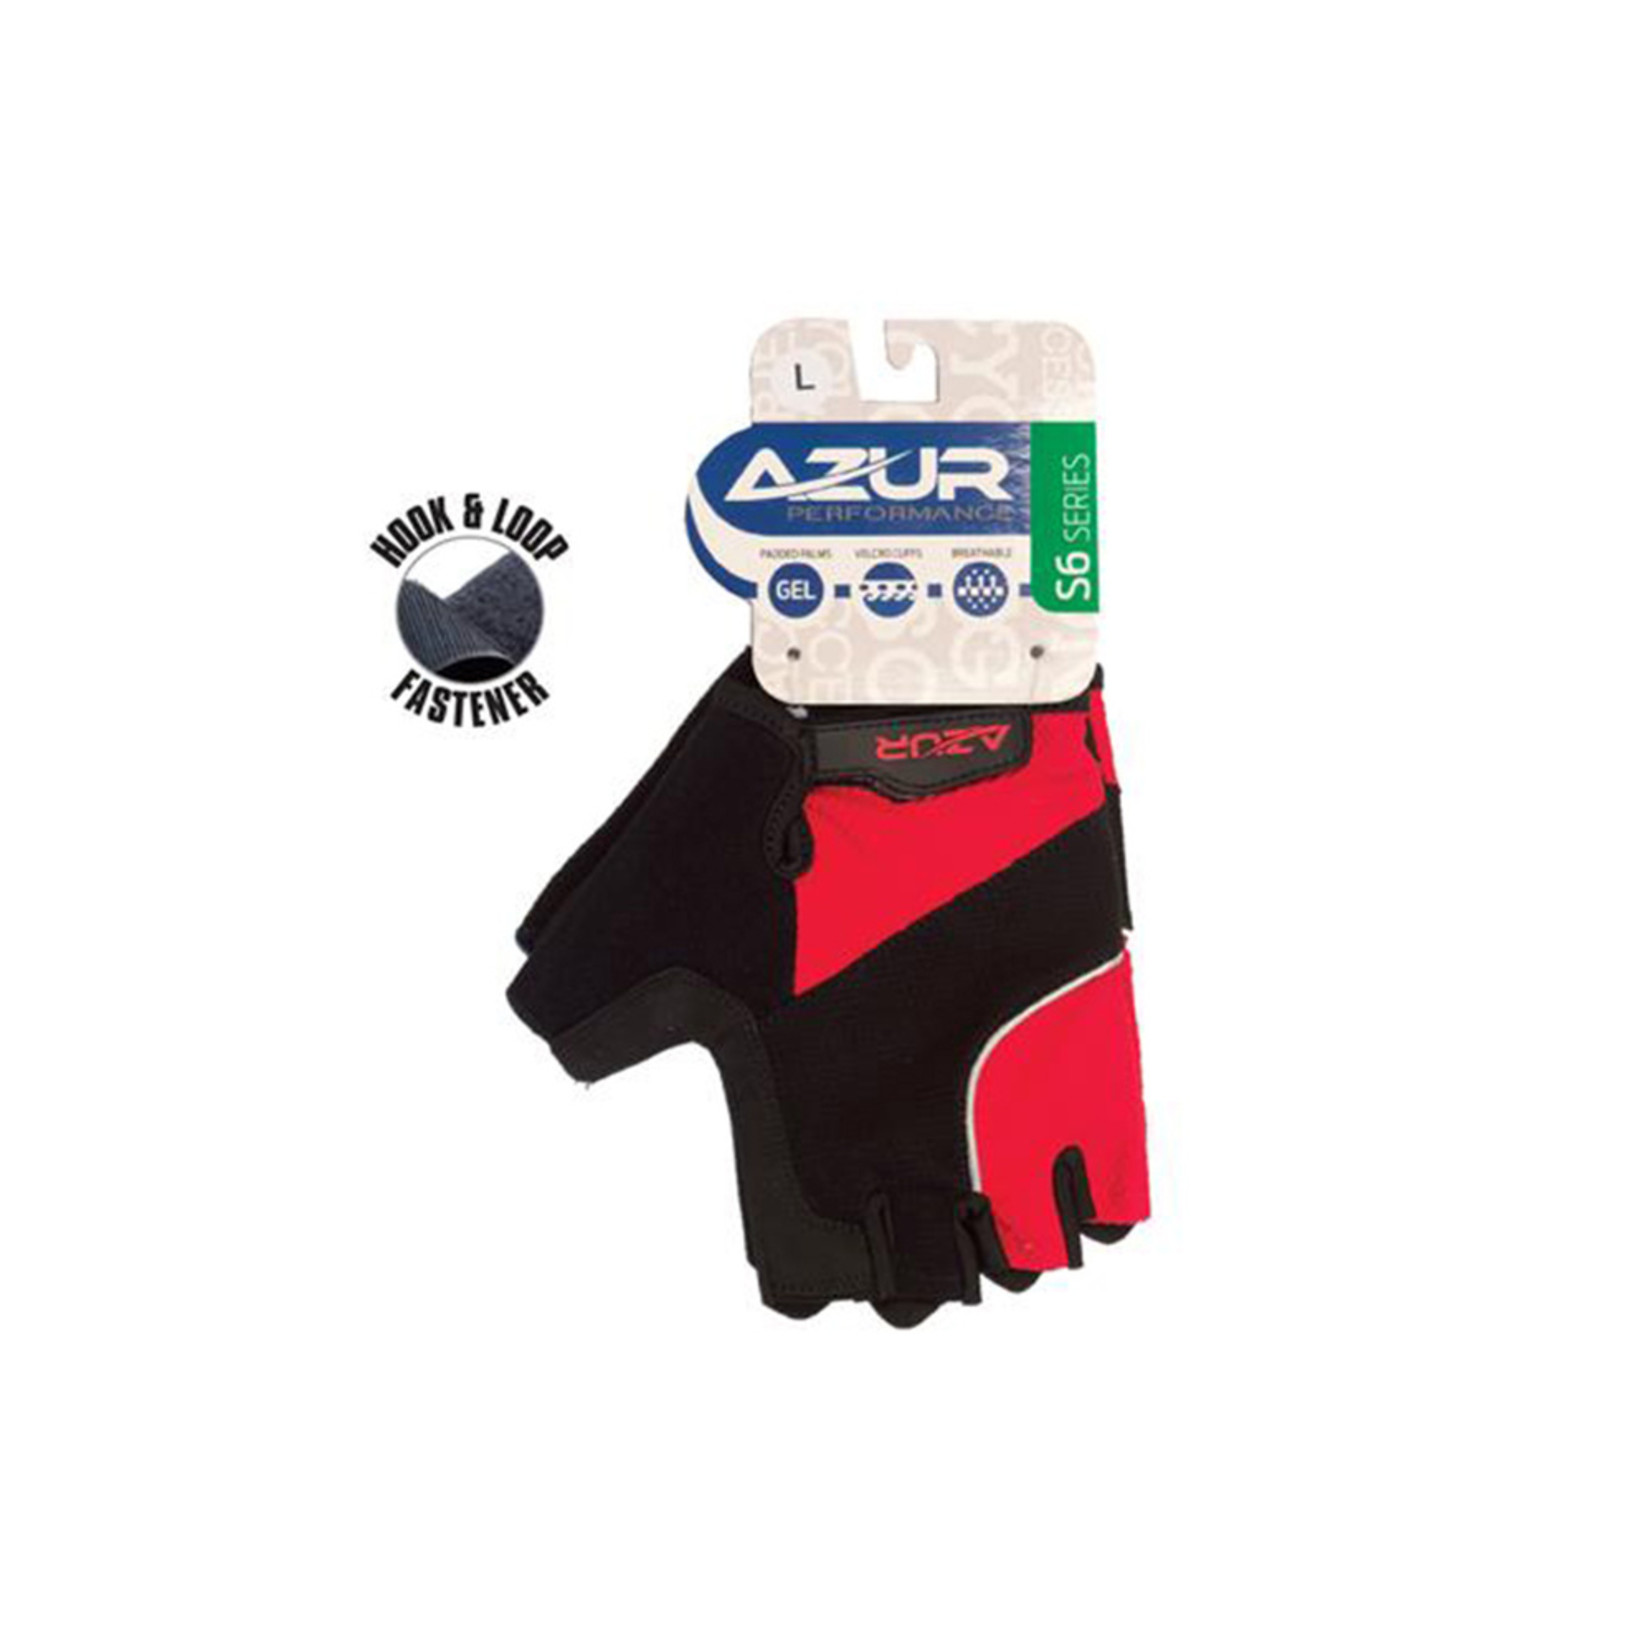 Azur Azur Bike/Cycling Glove - S6 Series - Synthetic Palm - Red - X-Small